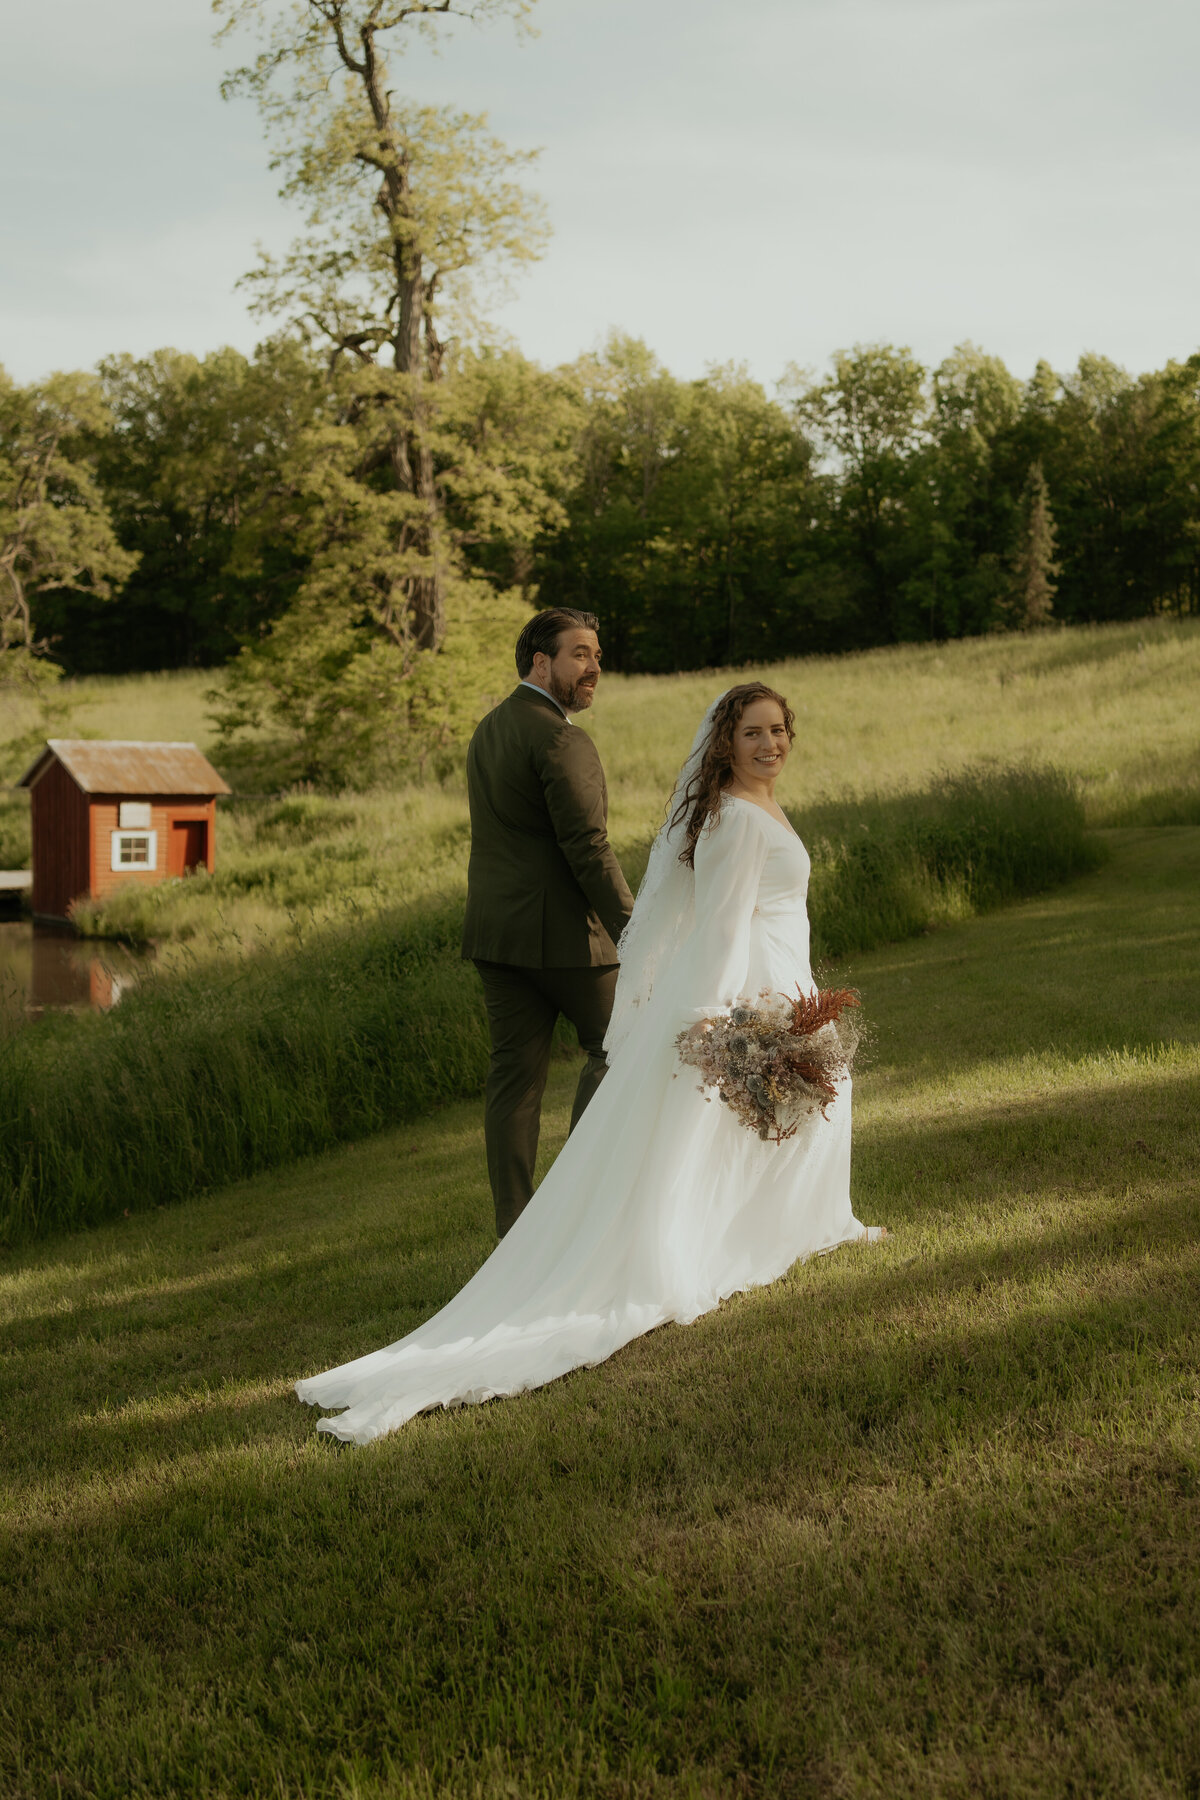 A bride and groom walk hand in hand on a lush green hillside at their wedding at Blenheim Hill Farm in Jefferson, NY with a small red barn in the background. The bride, in a flowing white gown, smiles back at the camera while holding a bouquet of dried flowers. The groom, in a dark suit, also looks back, sharing the moment. The setting is serene and picturesque, perfect for a documentary-style wedding photograph that captures the couple's natural joy and the beauty of their surroundings.